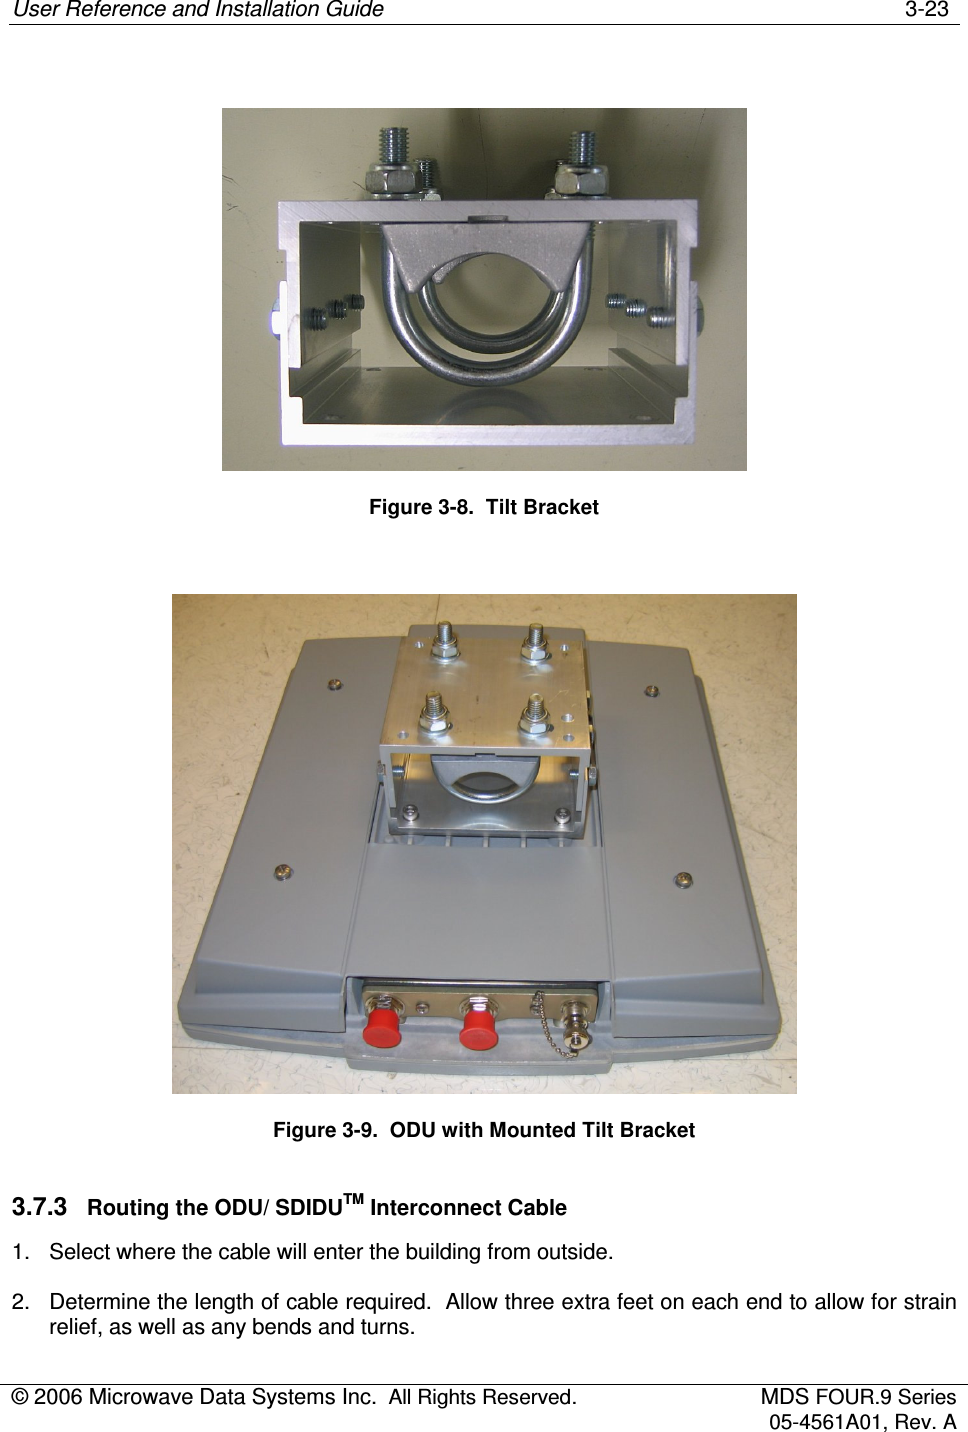 User Reference and Installation Guide    3-23 © 2006 Microwave Data Systems Inc.  All Rights Reserved.  MDS FOUR.9 Series 05-4561A01, Rev. A    Figure 3-8.  Tilt Bracket   Figure 3-9.  ODU with Mounted Tilt Bracket 3.7.3  Routing the ODU/ SDIDUTM Interconnect Cable 1.  Select where the cable will enter the building from outside. 2.  Determine the length of cable required.  Allow three extra feet on each end to allow for strain relief, as well as any bends and turns. 